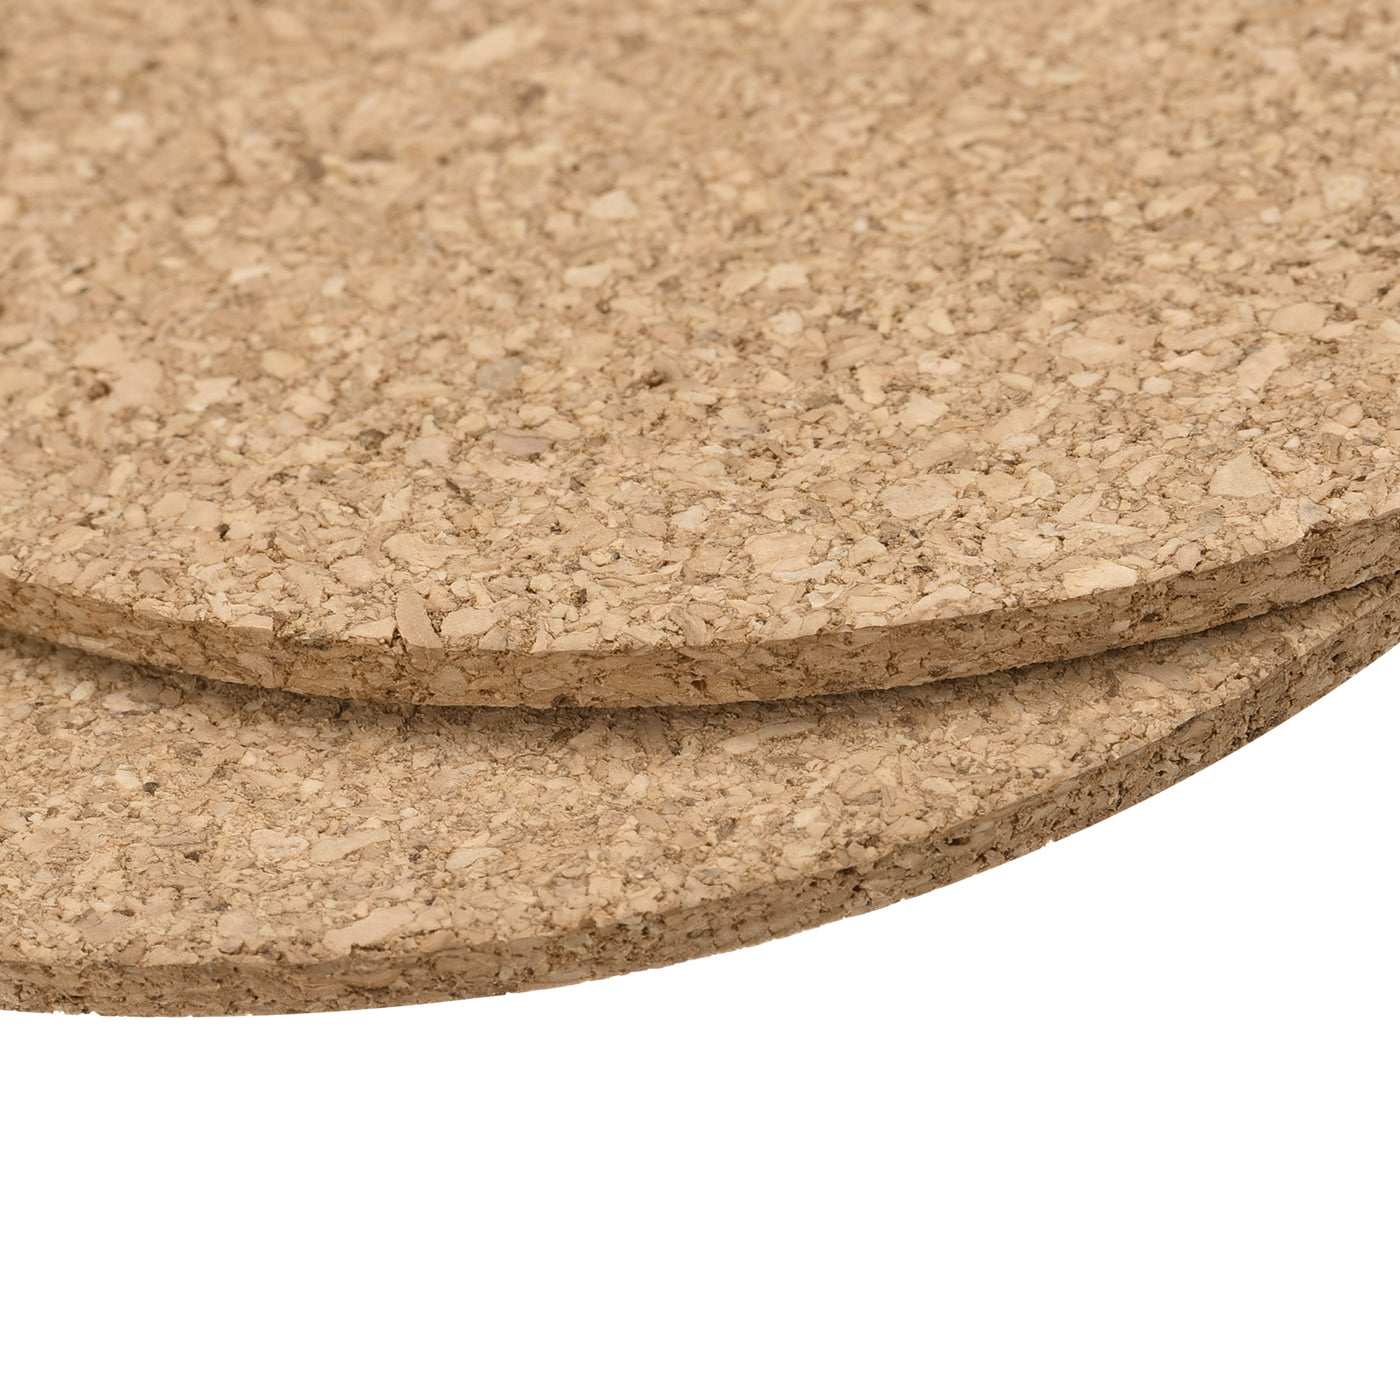 uxcell Uxcell 100mm(3.94") Round Coasters 3mm Thick Cork Cup Mat Pad for Tableware 8pcs